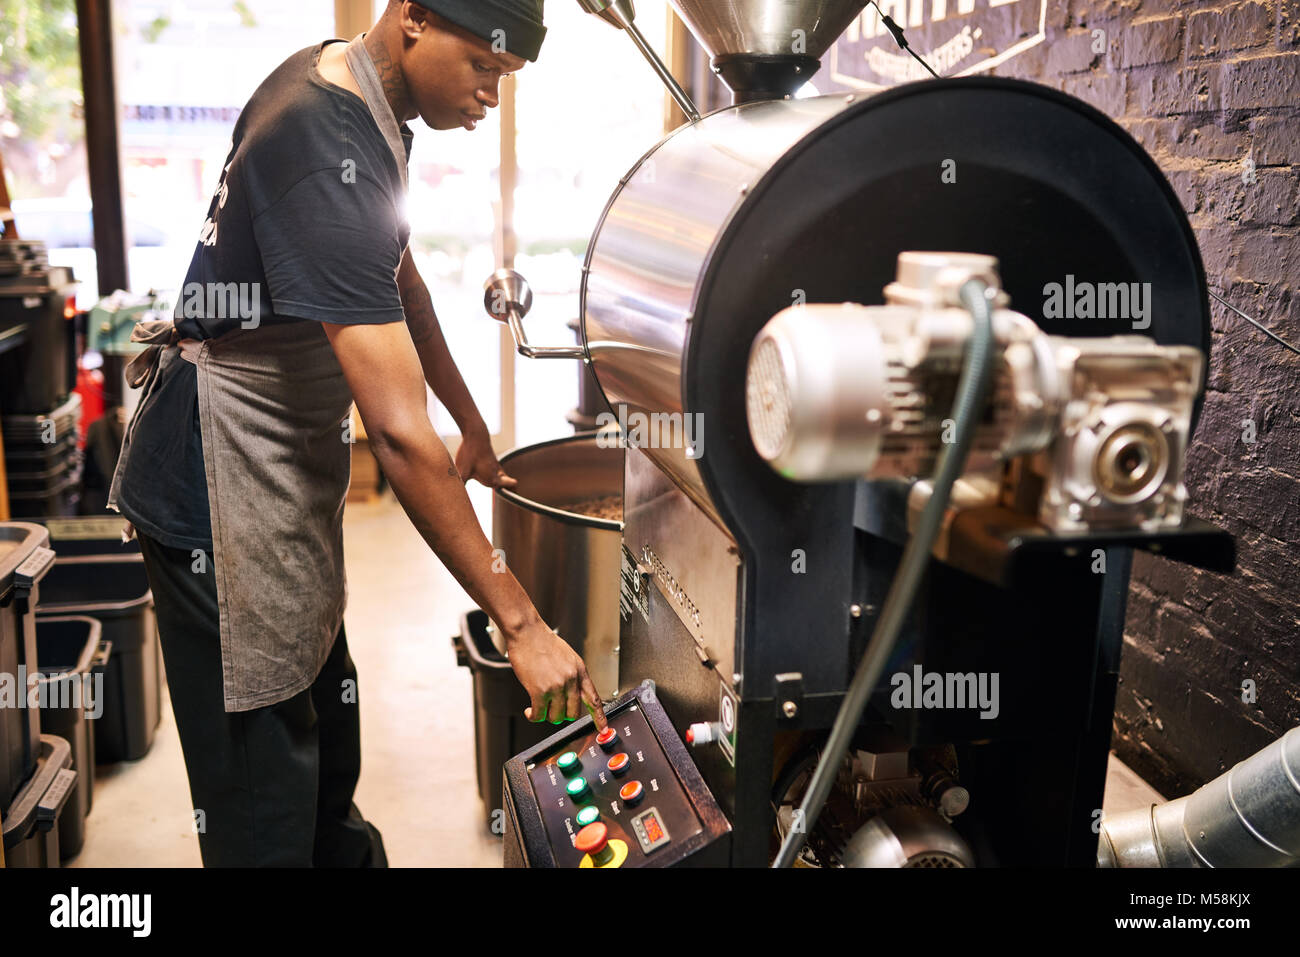 African man pushing red button on an industrial coffee machine, with large windows in the background allowing ample light into the space from behind t Stock Photo